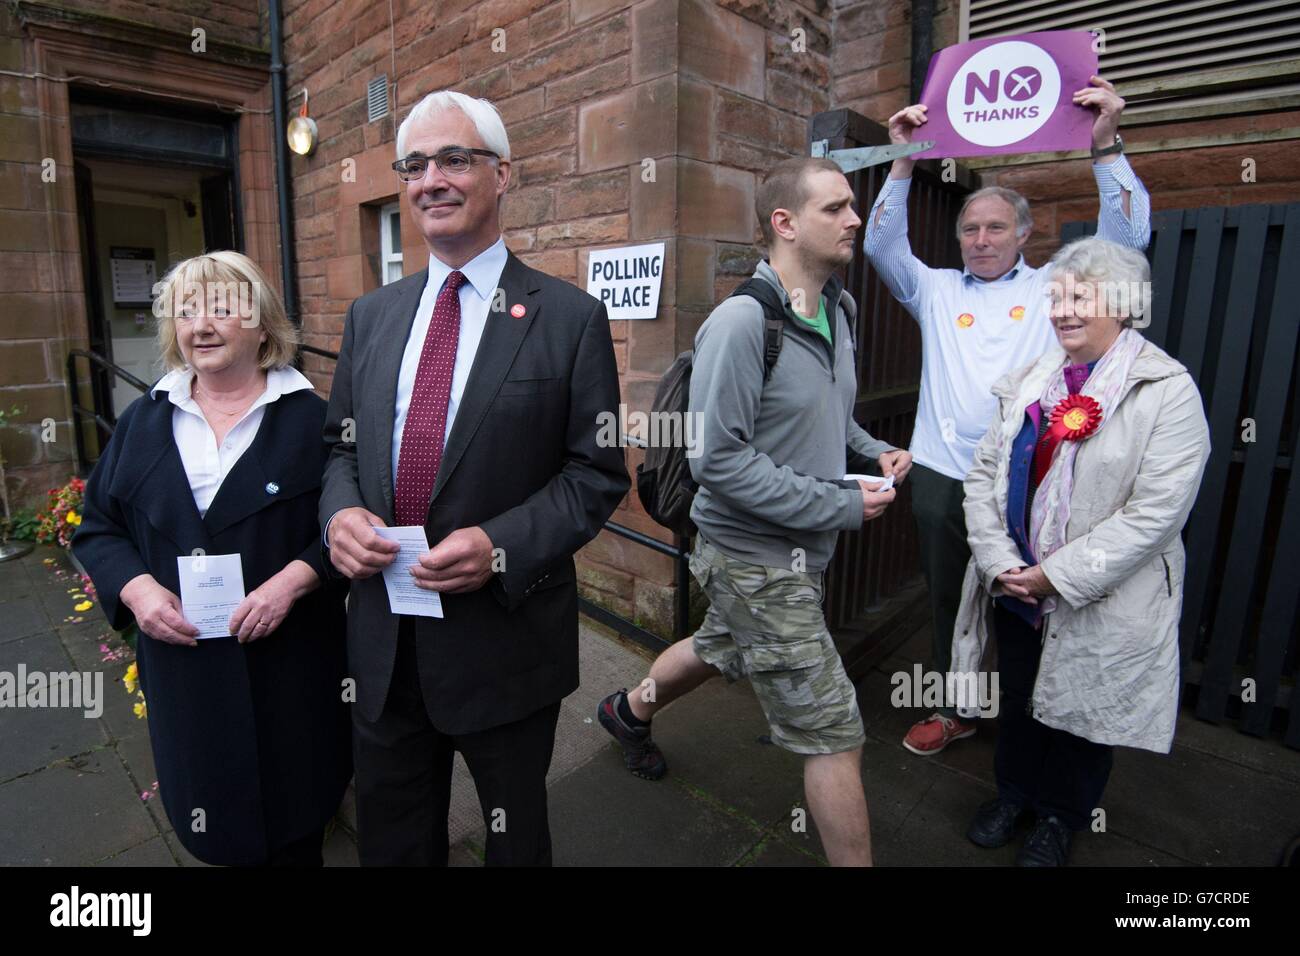 Former chancellor and leader of the Better Together campaign Alistair Darling with his wife Maggie (left) and No campaigners outside the polling station at the Church Hill Theatre in Edinburgh as polls have opened on a historic day for Scotland as voters determine whether the country should remain part of the United Kingdom. Stock Photo